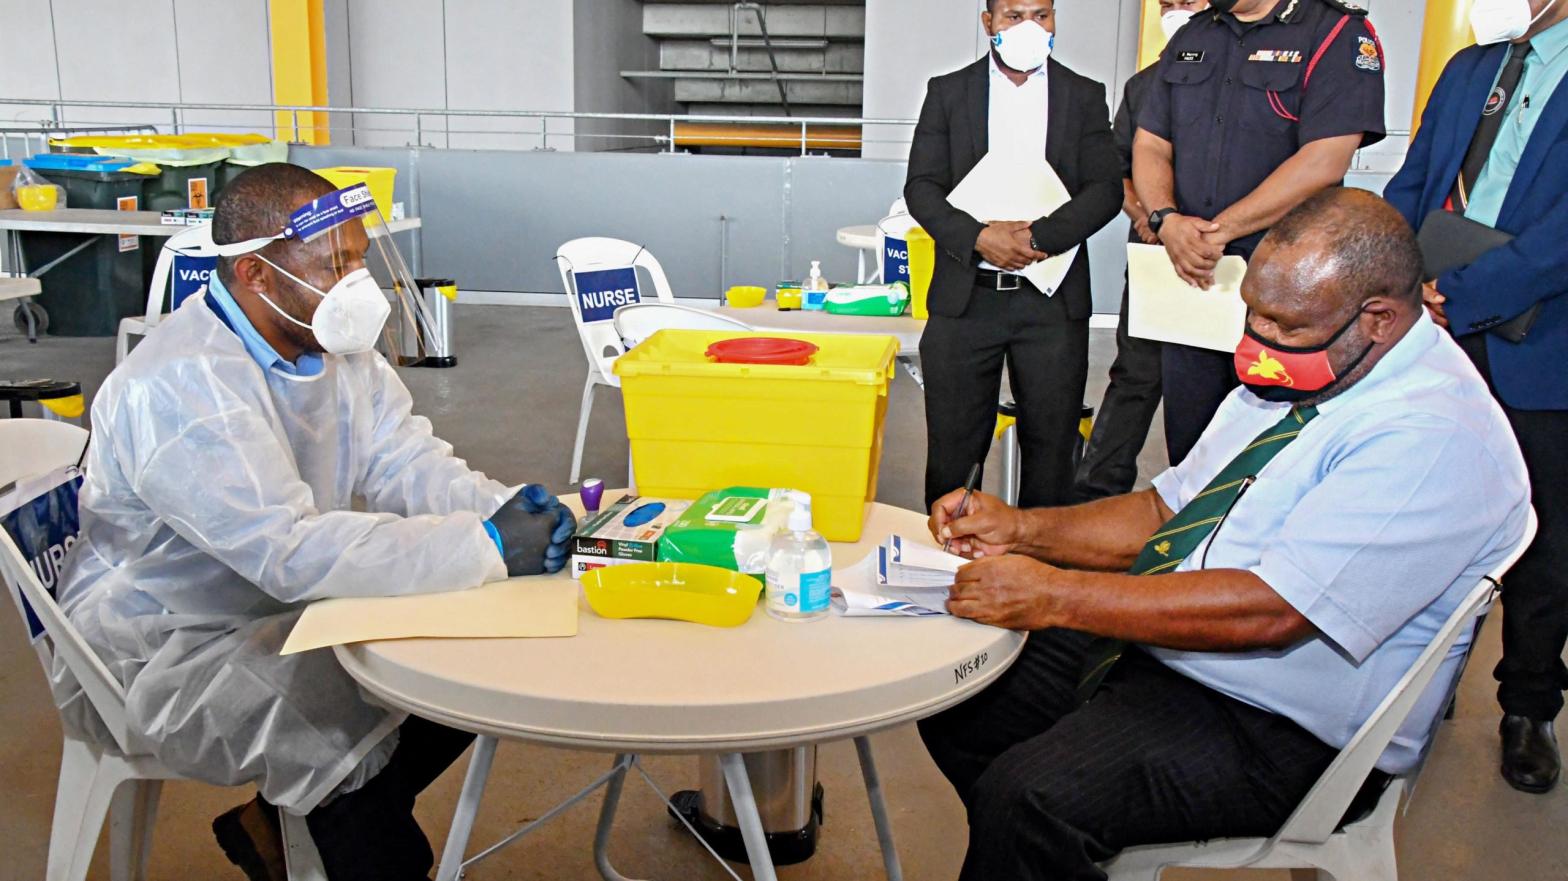 Papua New Guinea's Prime Minister James Marape (R) preparing to receive a dose of the AstraZeneca Covid-19 vaccine in Port Moresby on March 30, 2021. (Photo: Gorethy Kenneth/AFP, Getty Images)